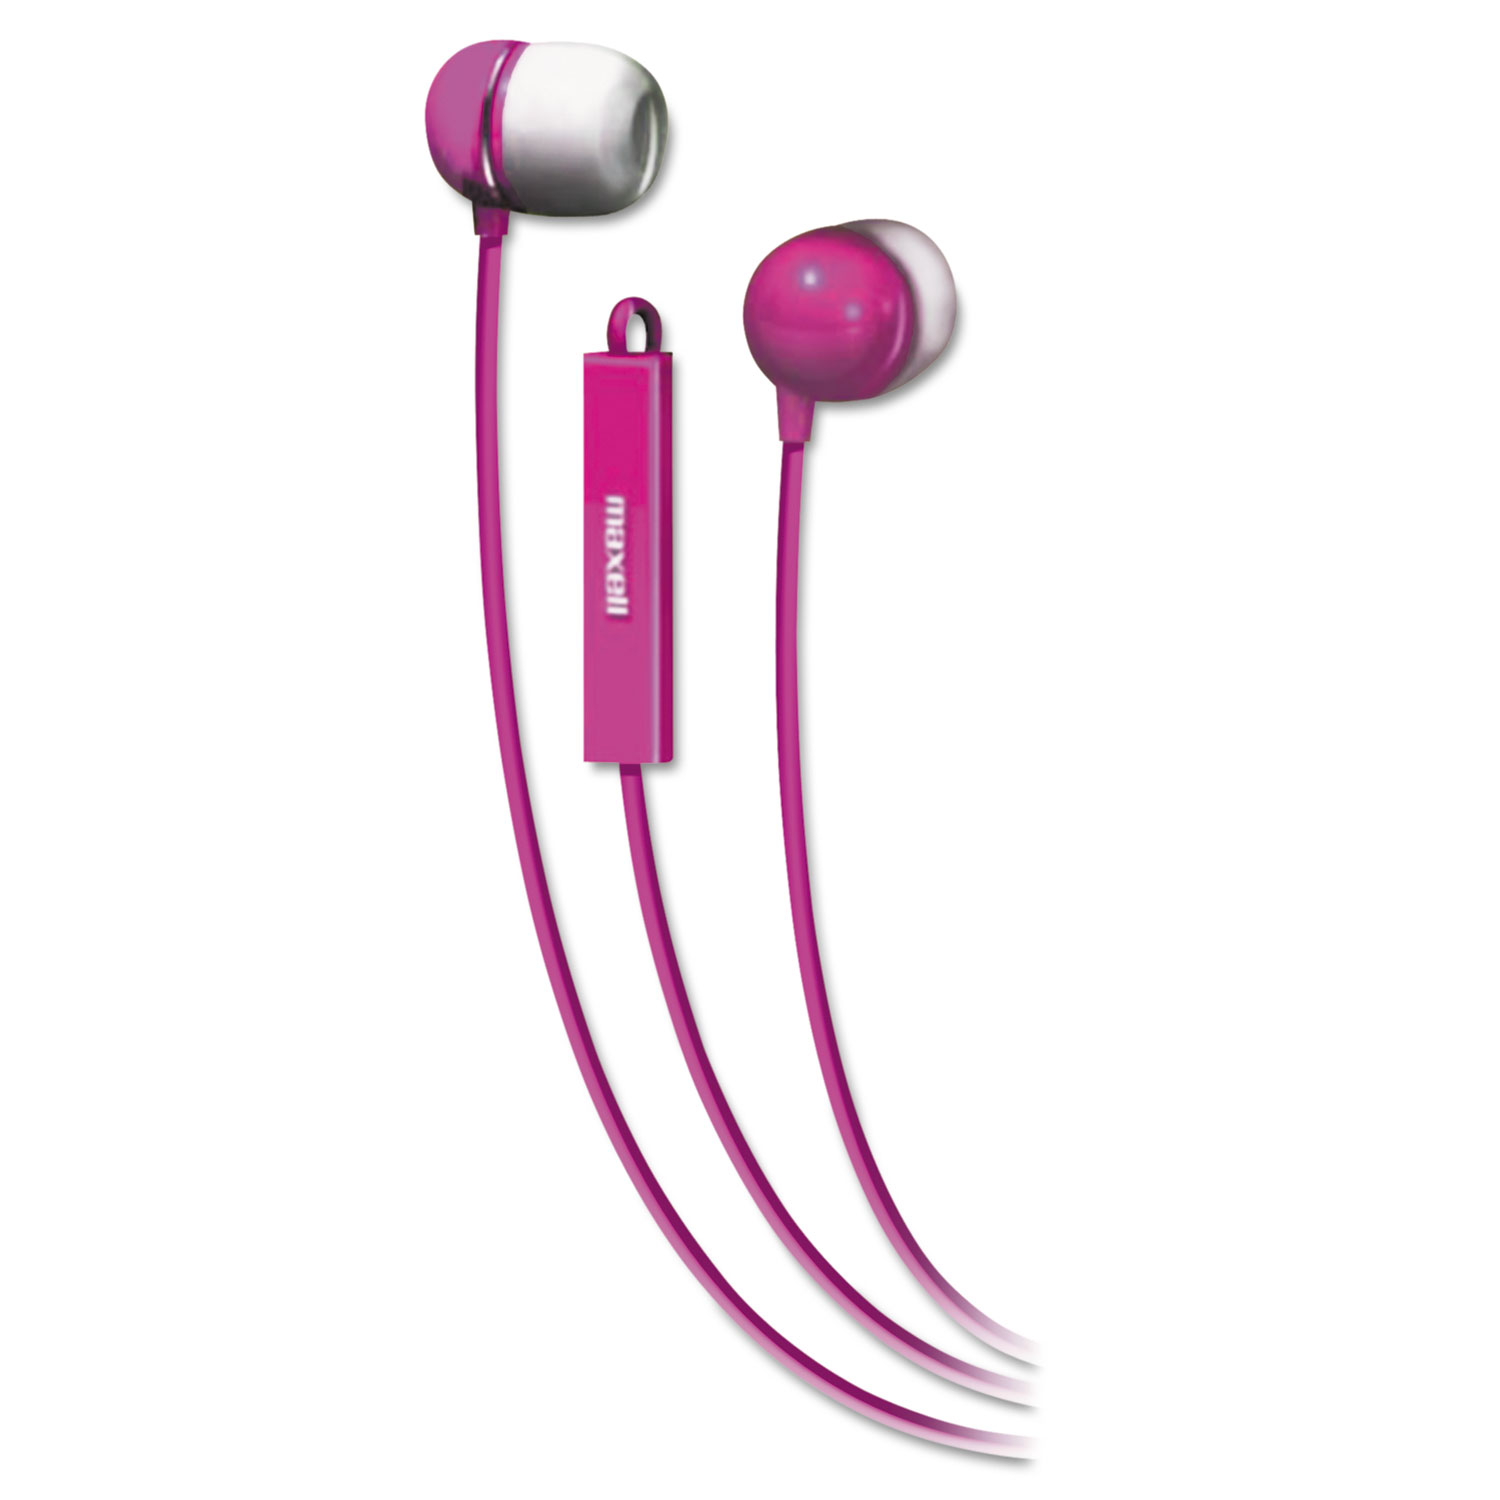  Maxell 190304 In-Ear Buds with Built-in Microphone, Pink (MAX190304) 